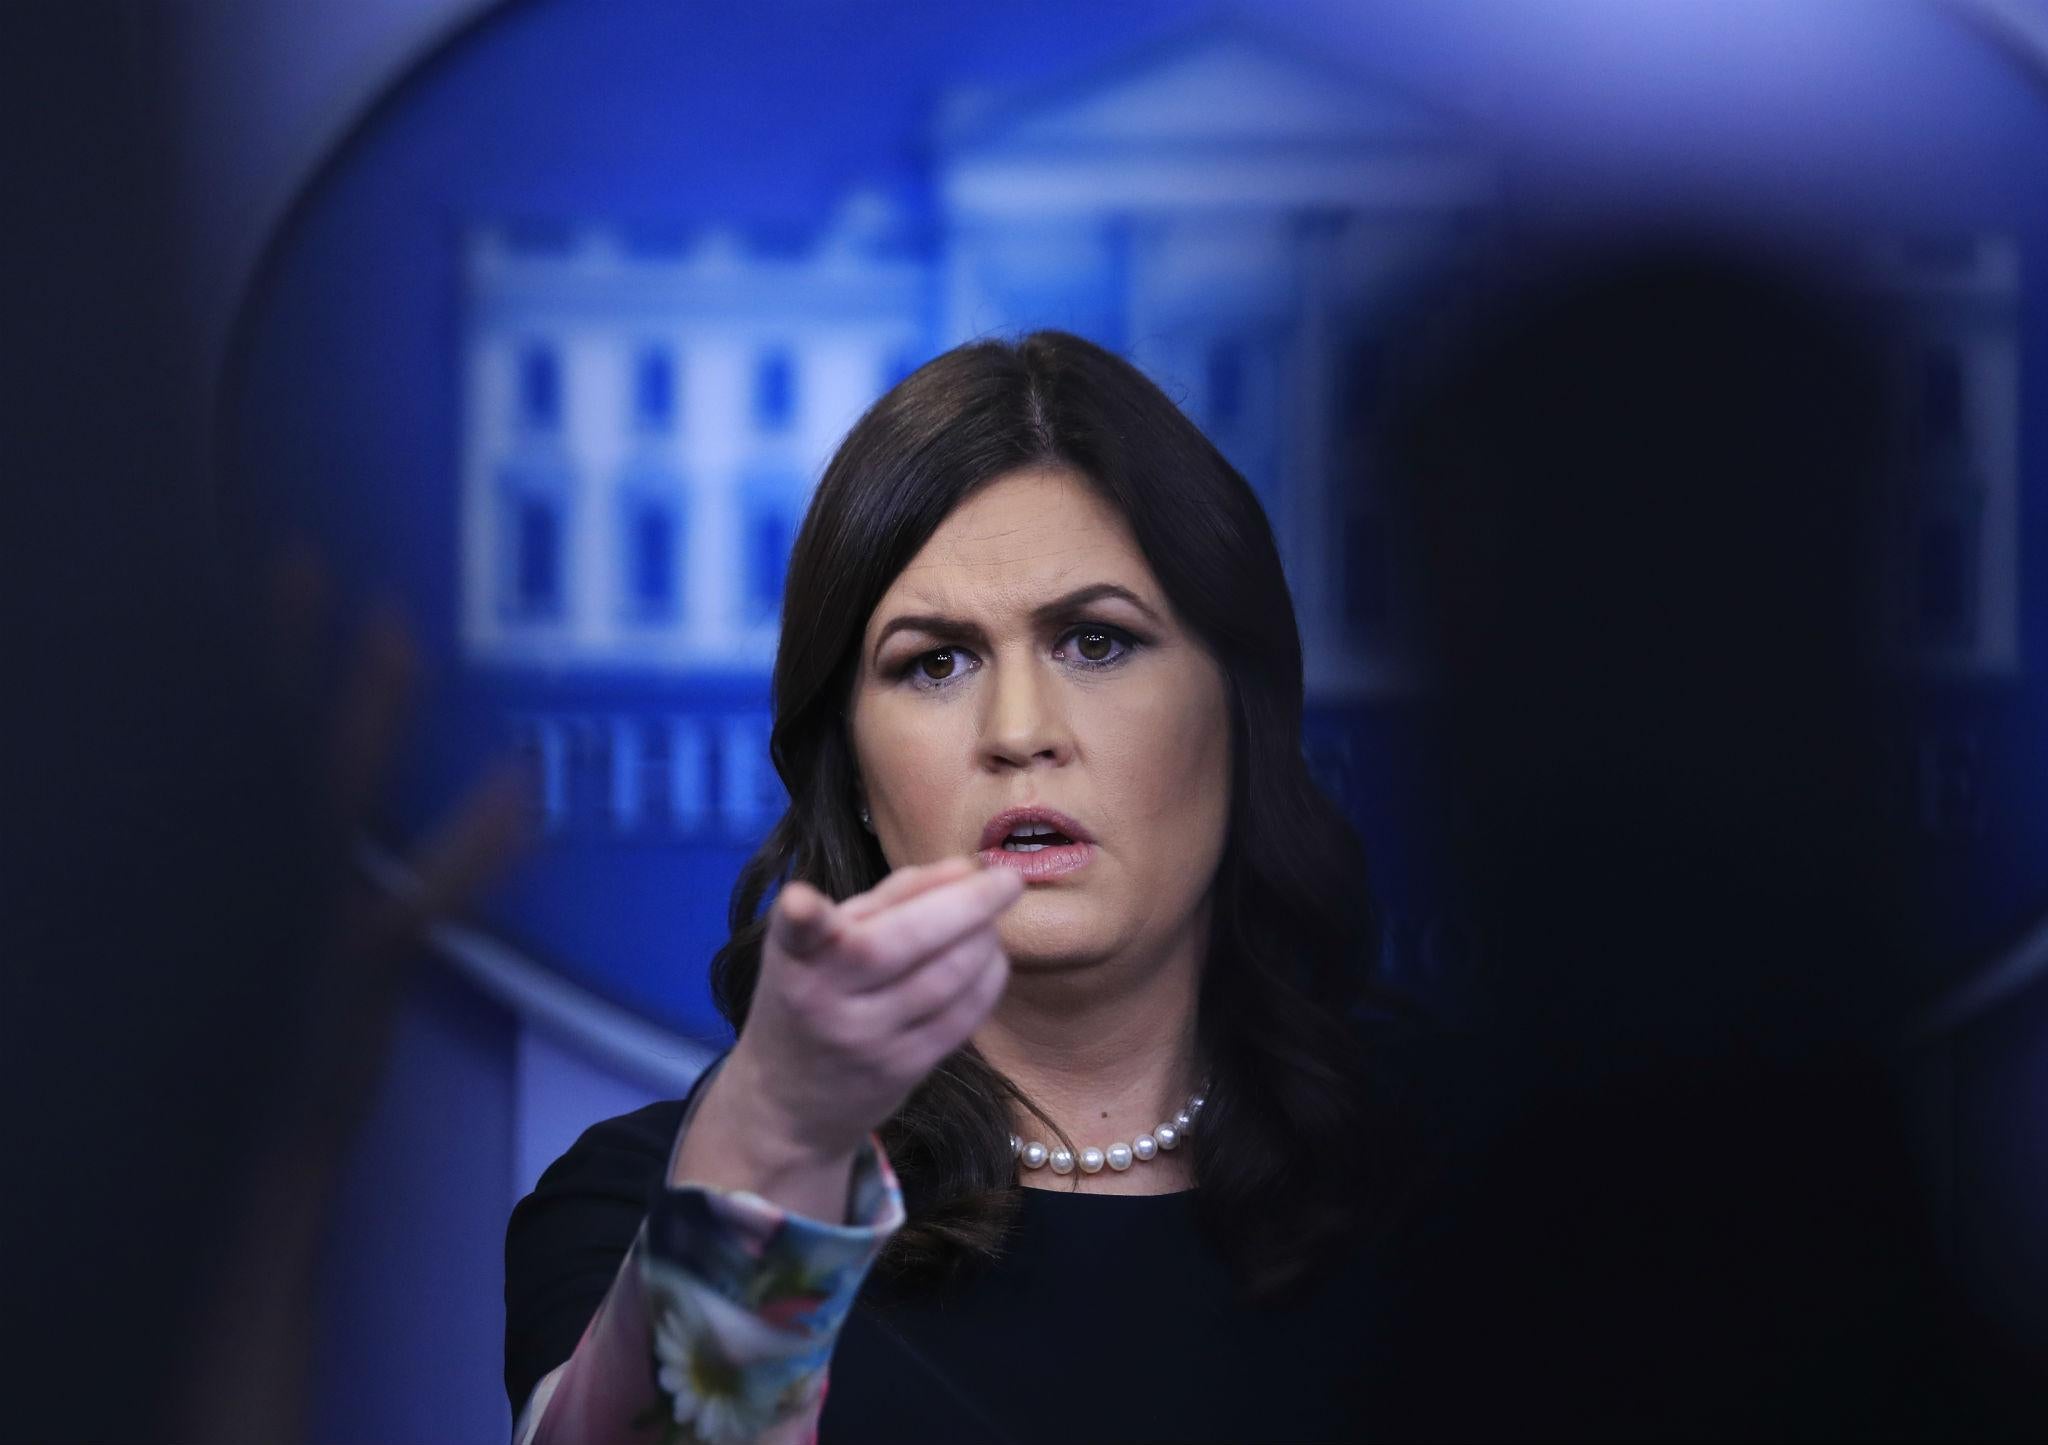 Ms Sanders attacked a Democrat on Twitter after she was misquoted